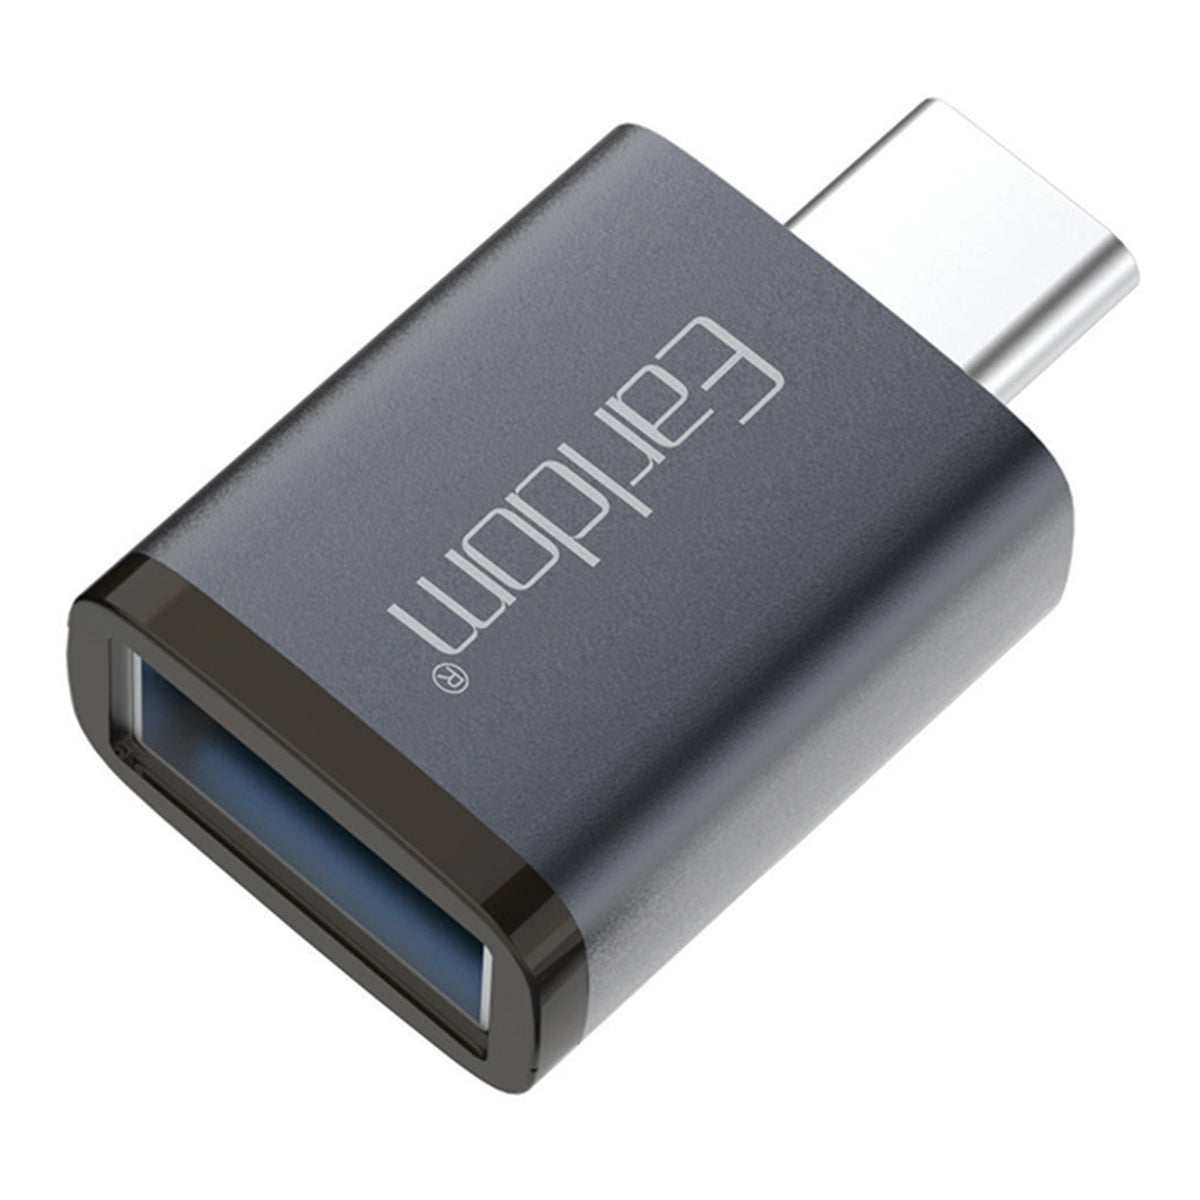 OTG Adapter USB to Type C, USB to USB C Adapter, Type C Female to A Male Charger Converter